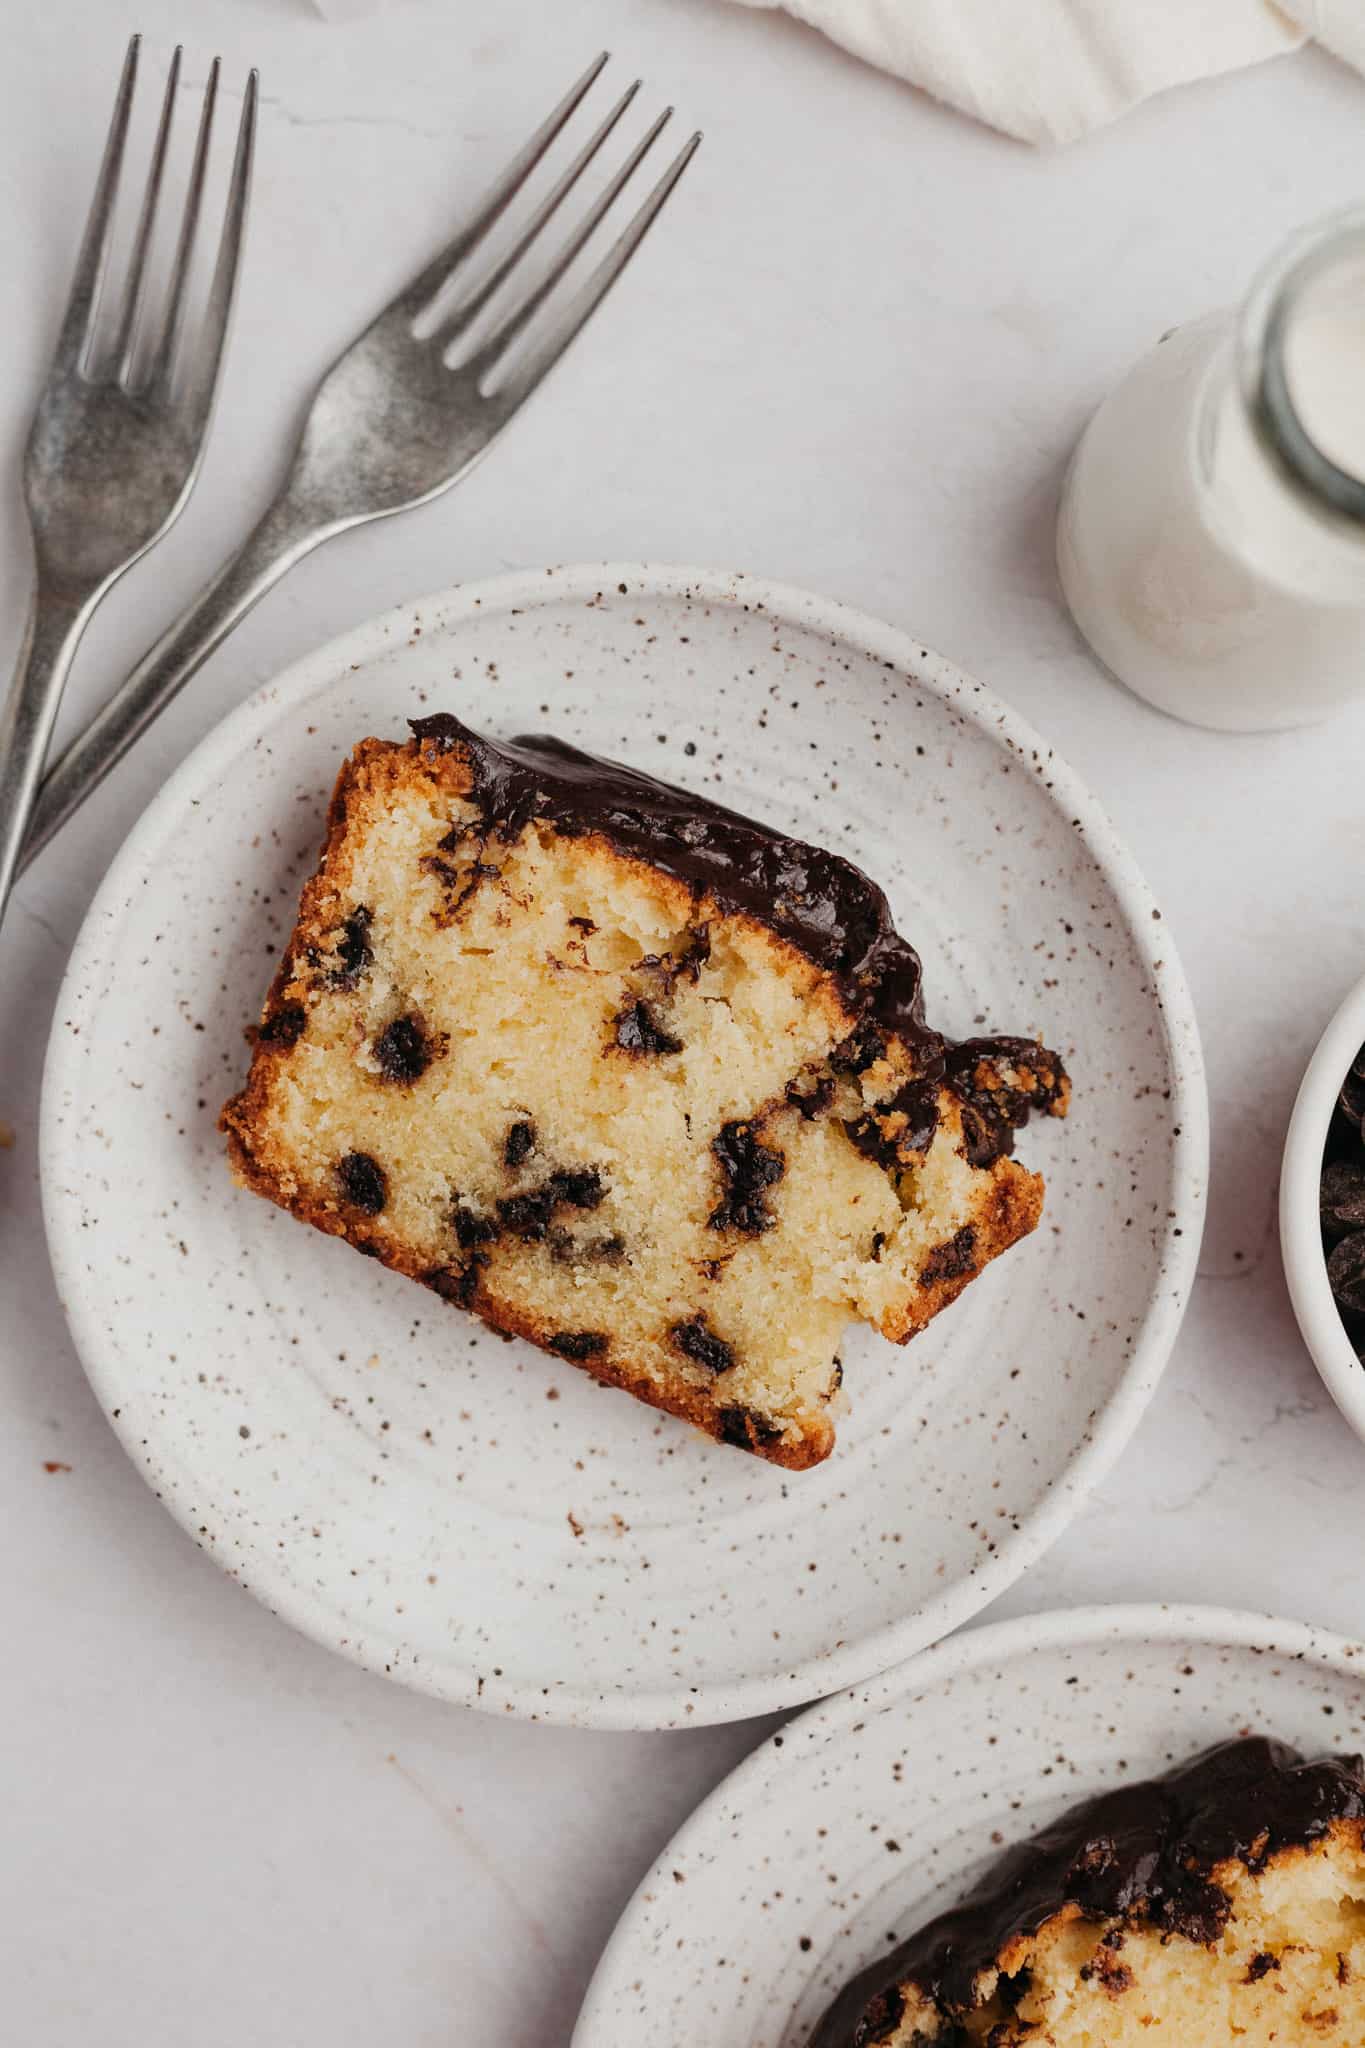 A slice of chocolate chip pound cake on a small speckled plate.